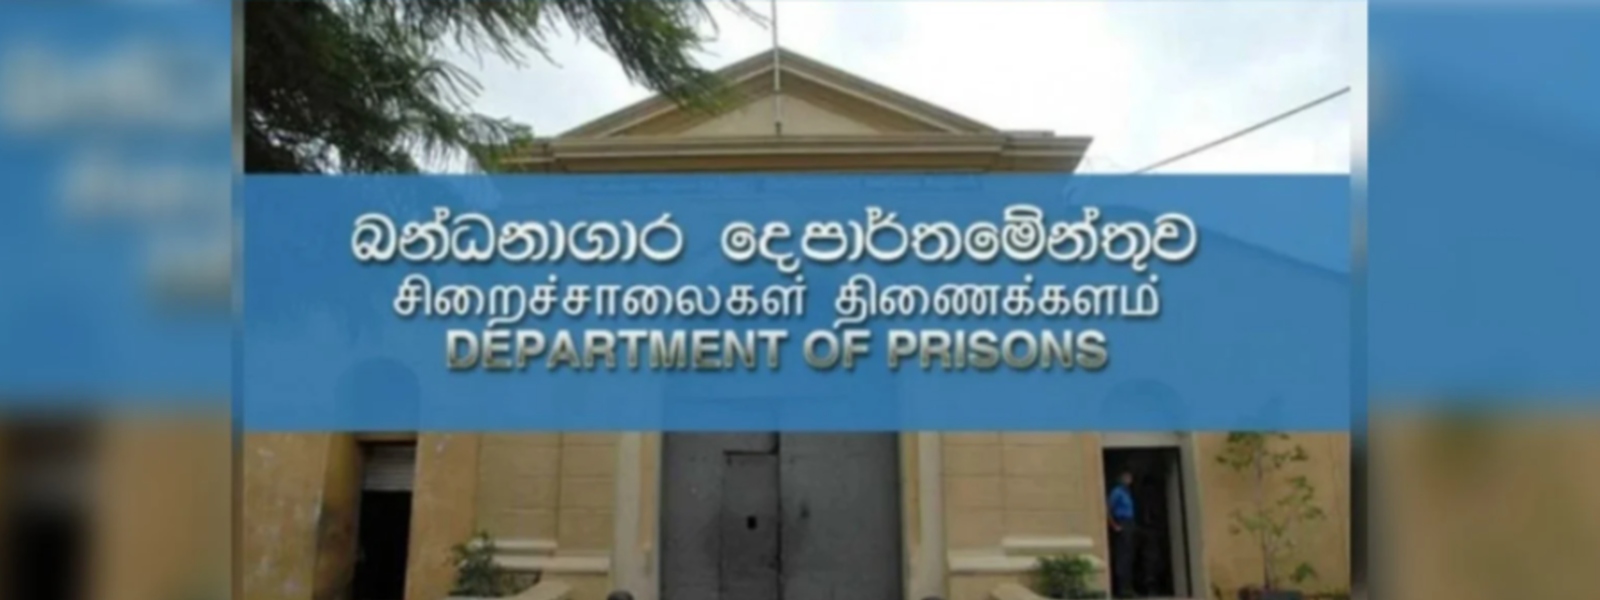 Hotline introduced to inquire on inmates at Mahara prison